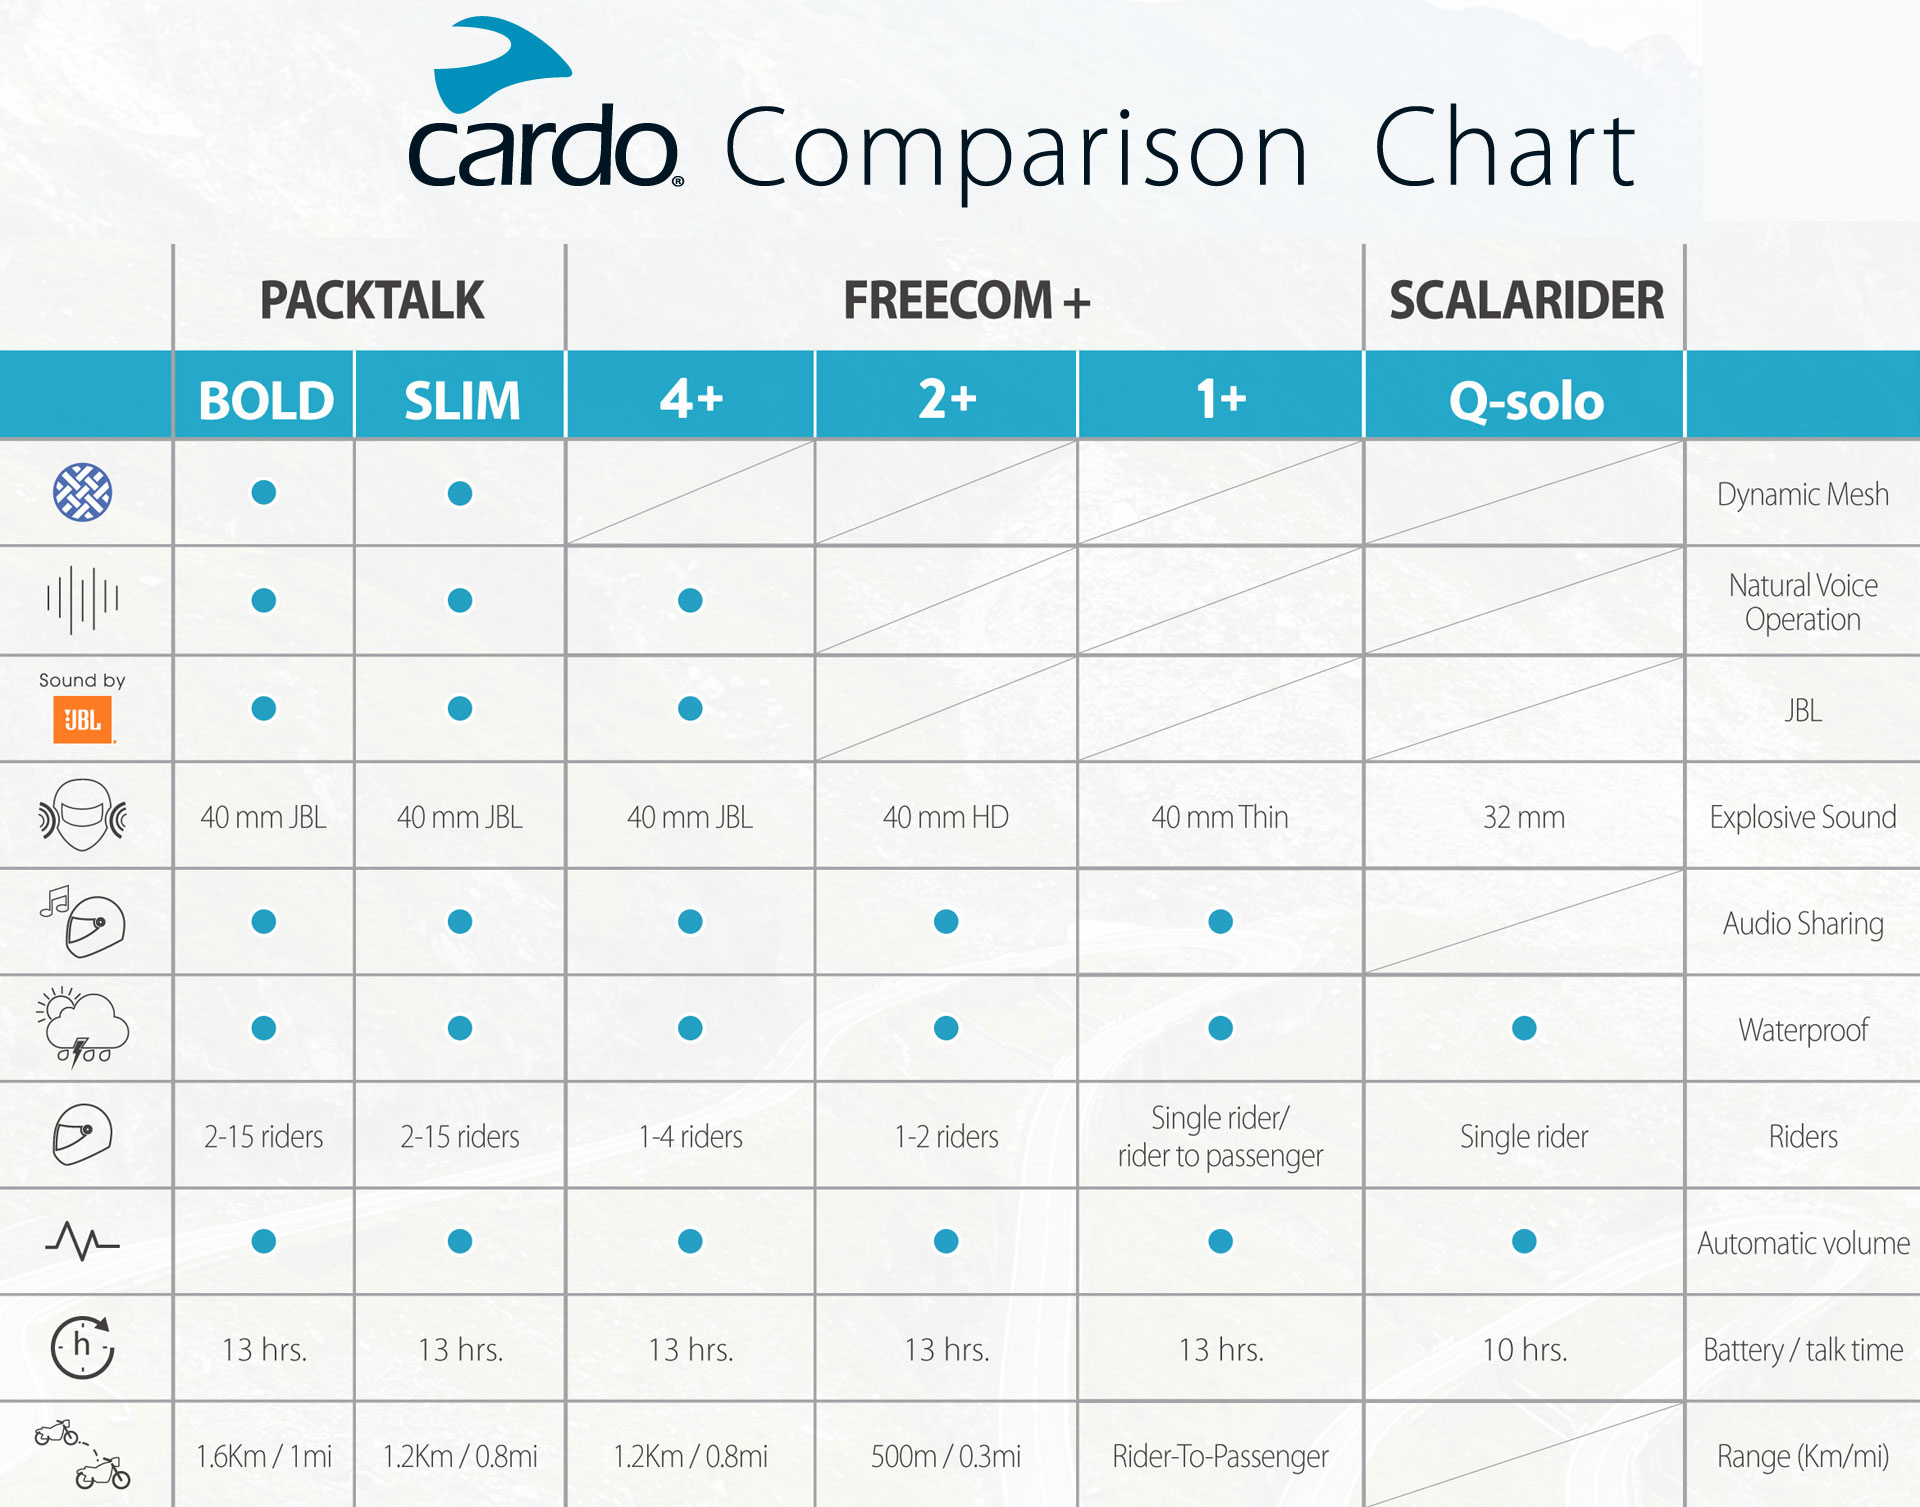 Here's a run down of the Cardo range and what you get on each